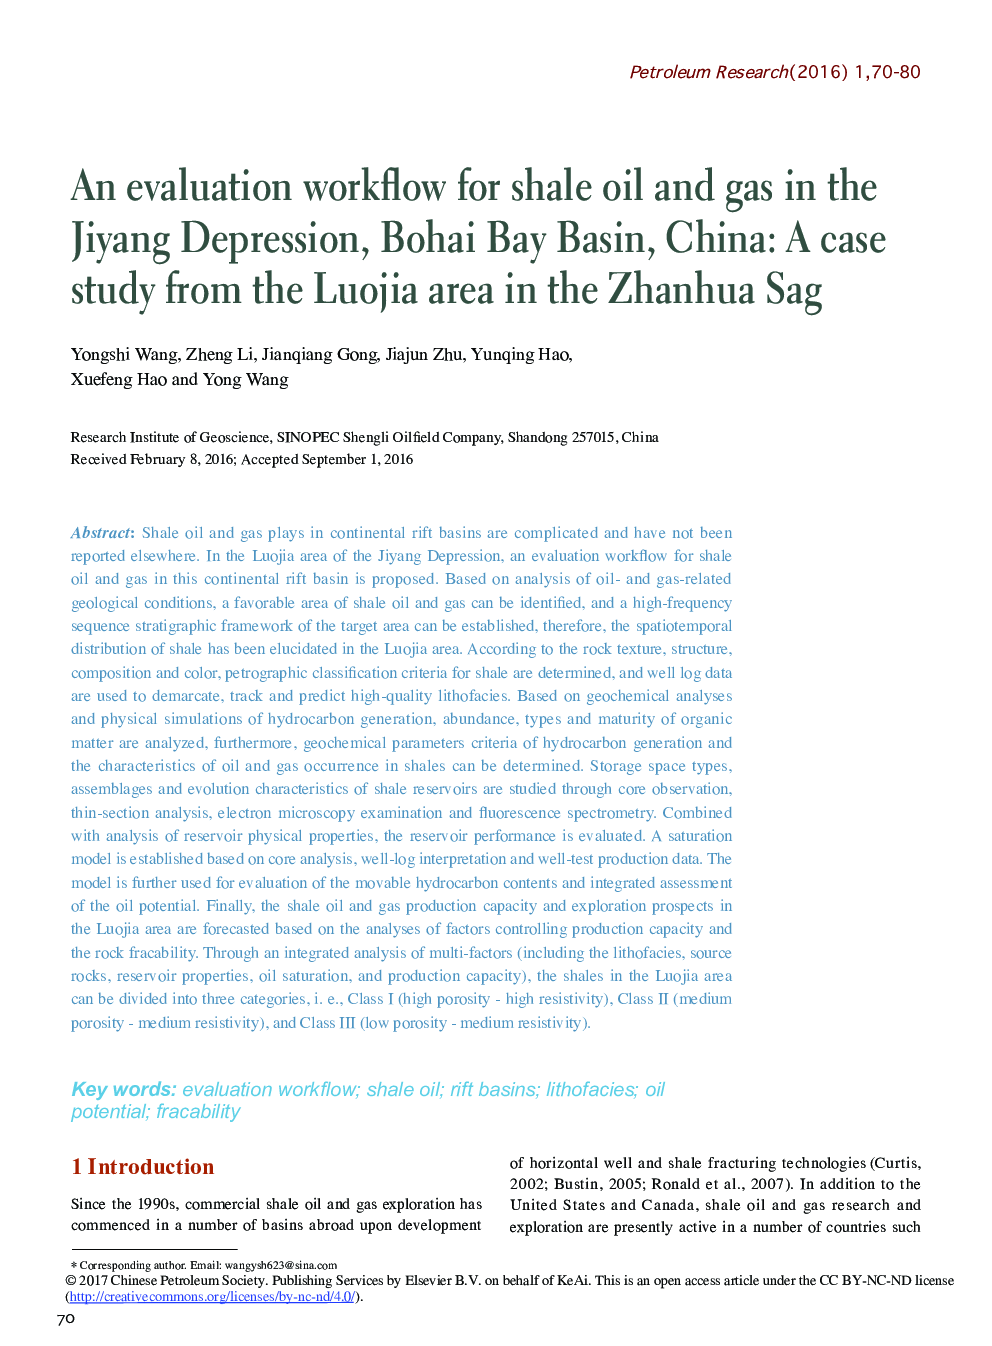 An evaluation workflow for shale oil and gas in the Jiyang Depression, Bohai Bay Basin, China: A case study from the Luojia area in the Zhanhua Sag